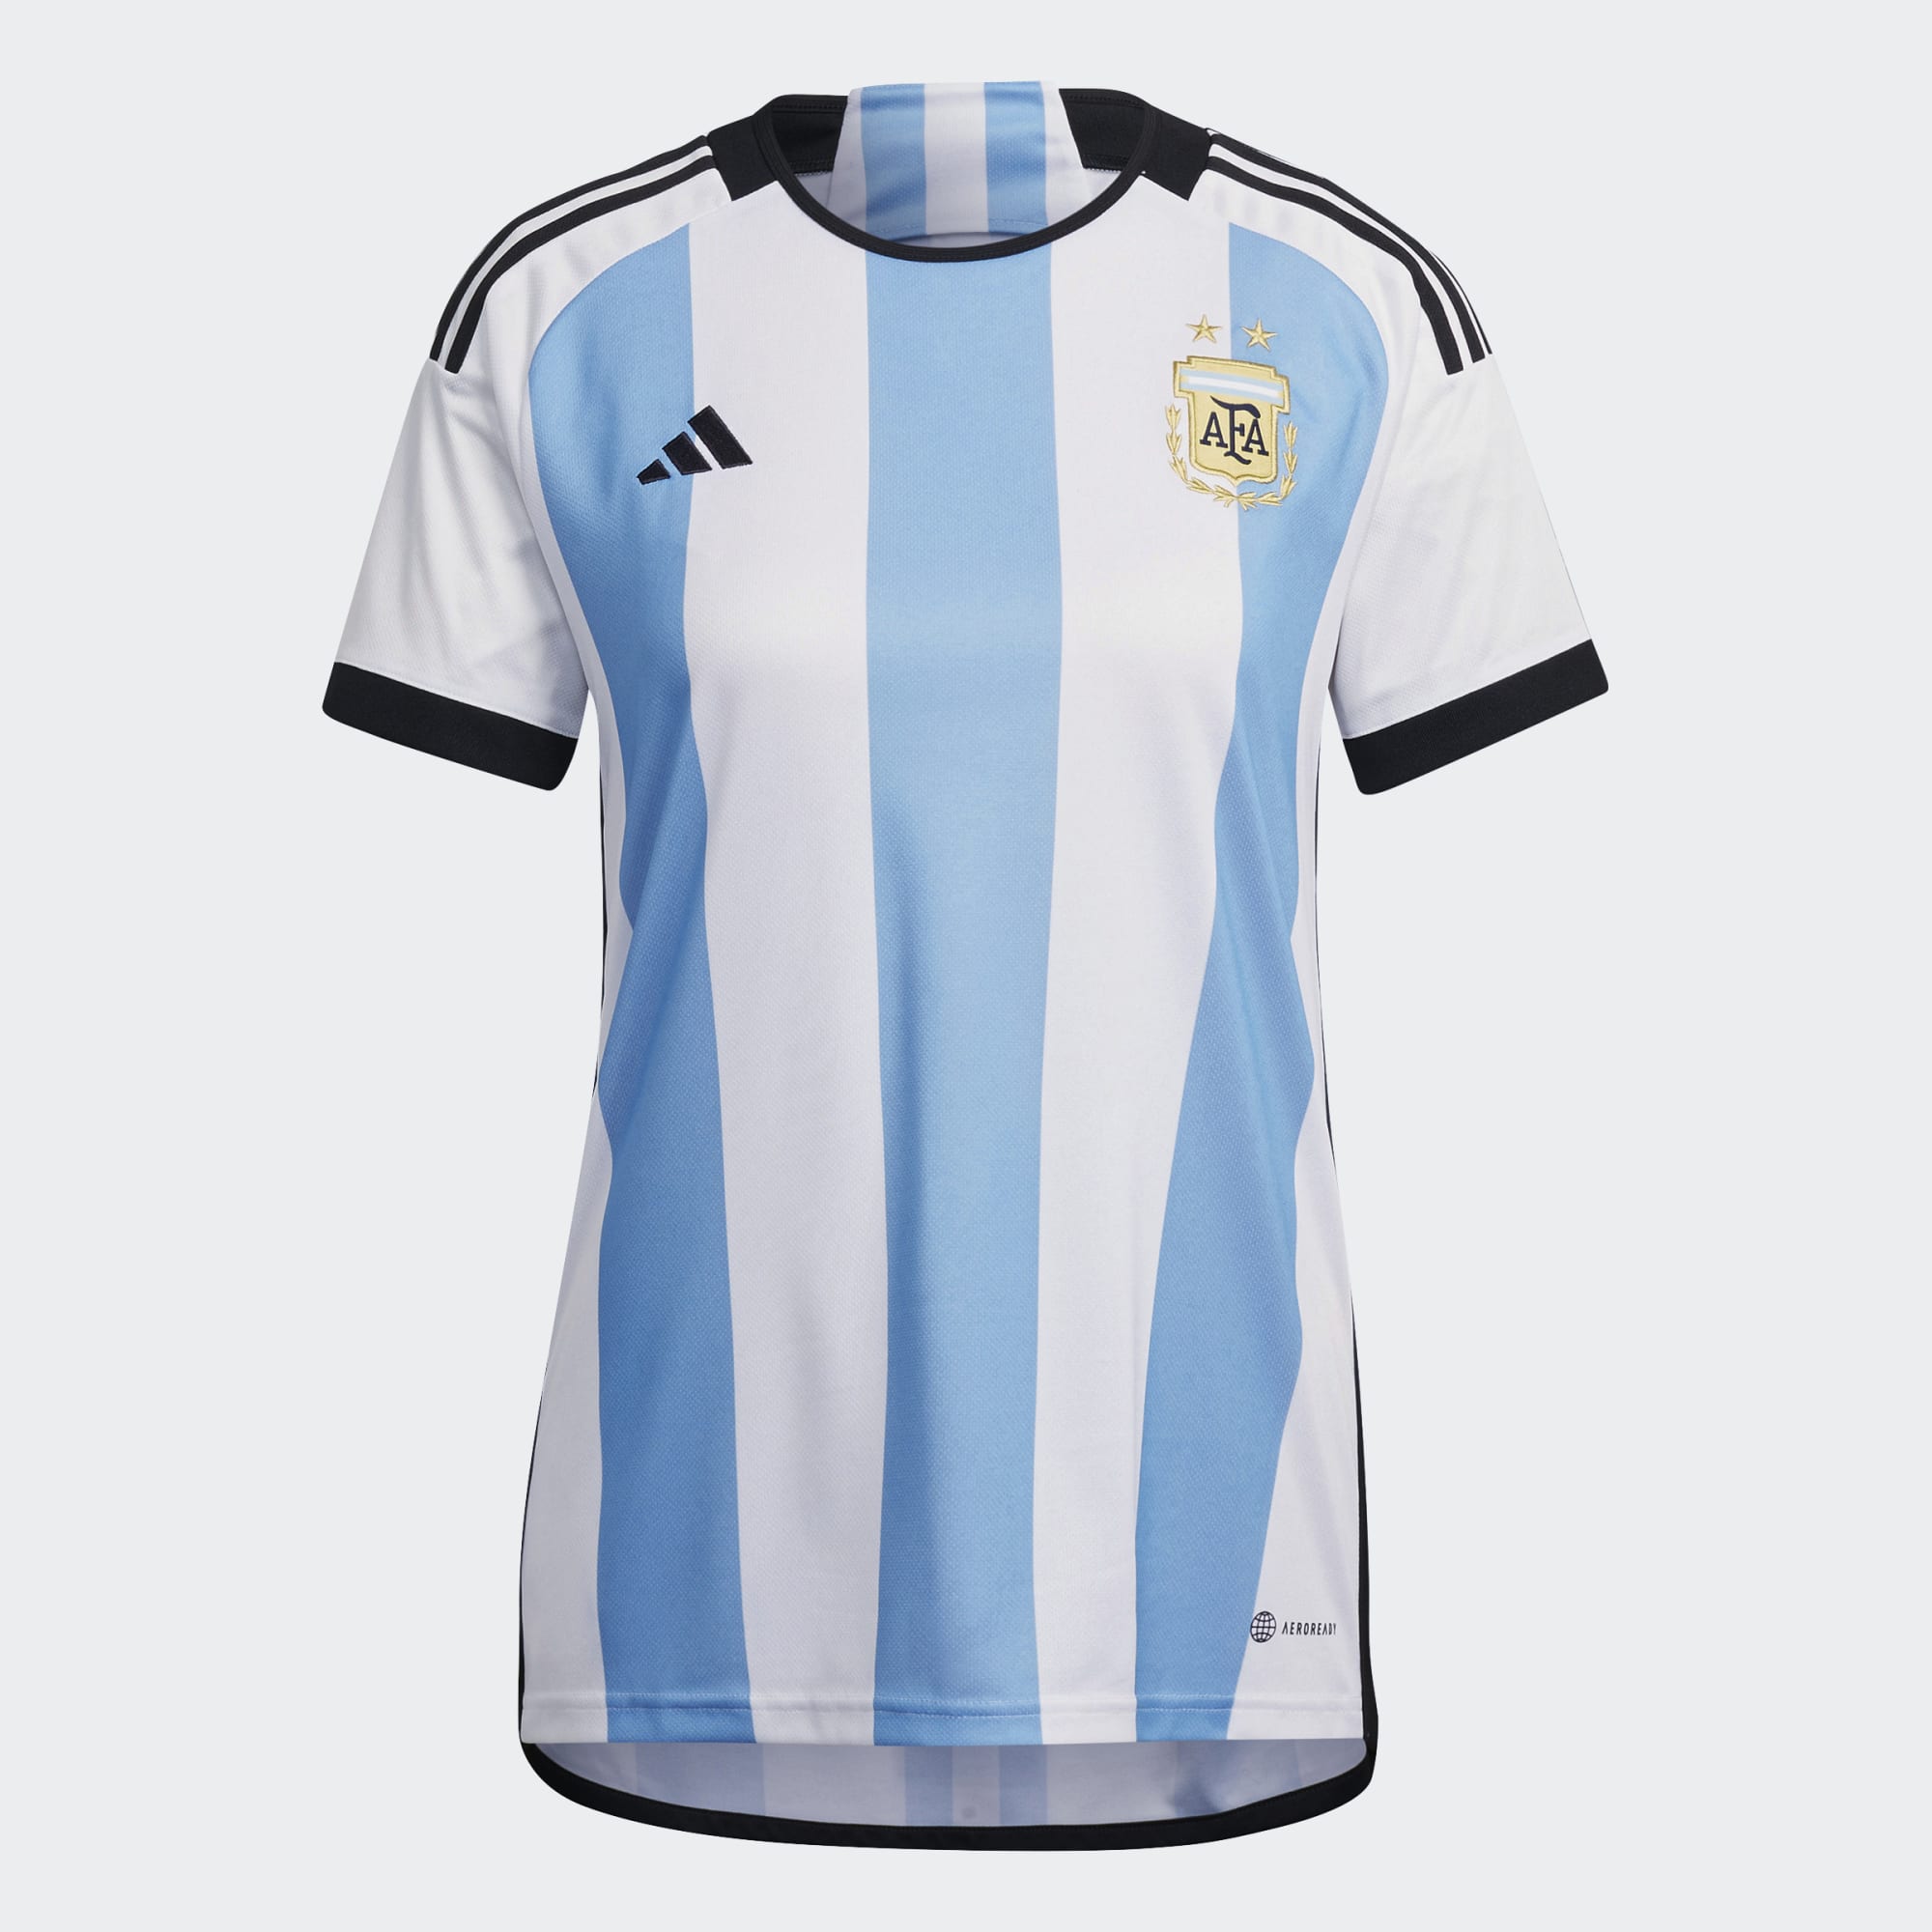 Argentina's soccer traditions' uniforms